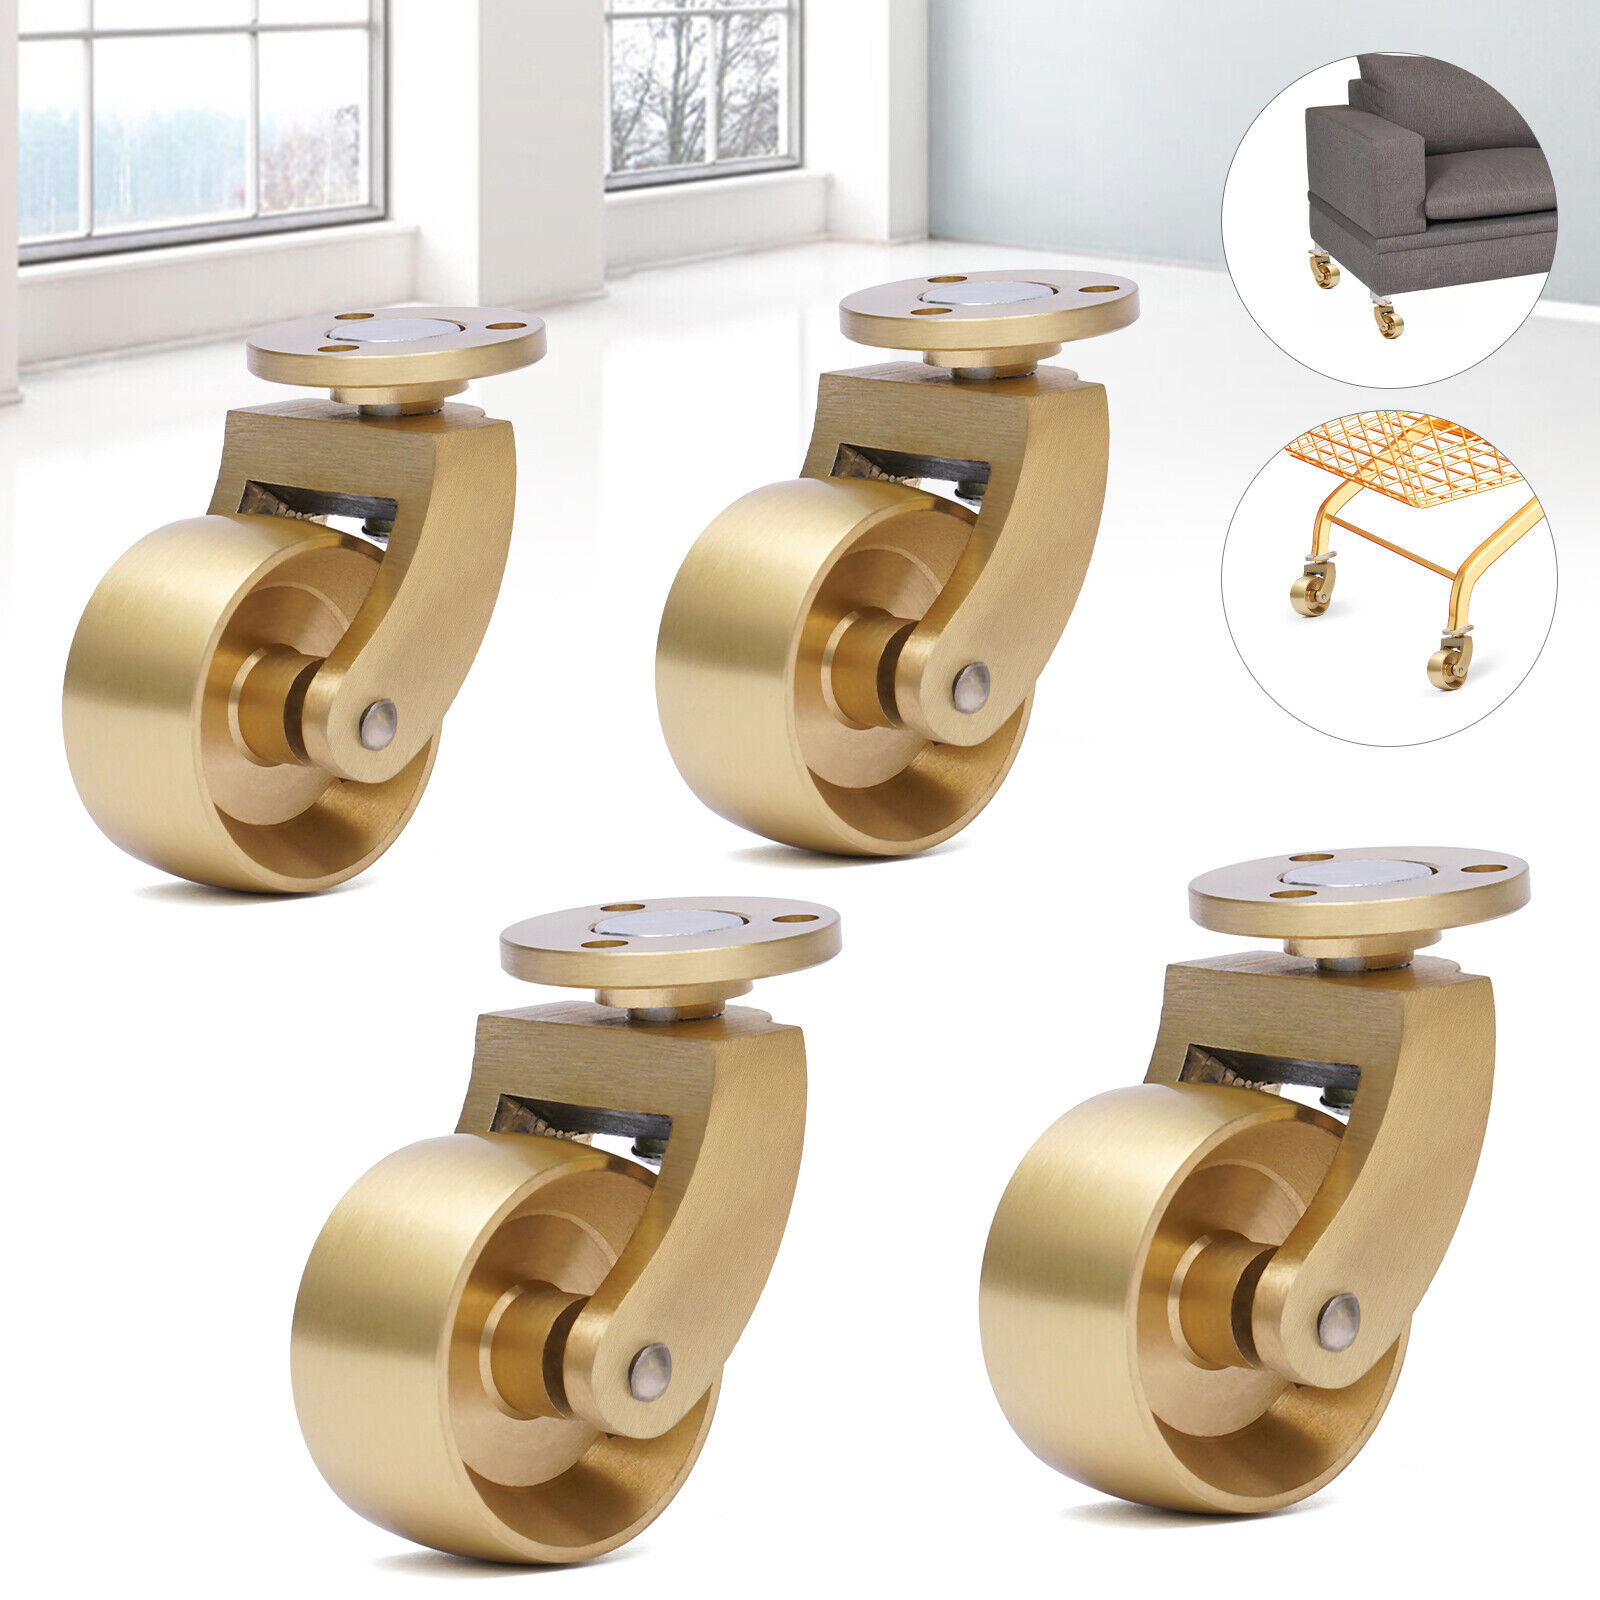 4 Vintage Style SOLID BRASS Strong Swivel Caster Wheels Brass Round Heavy Duty